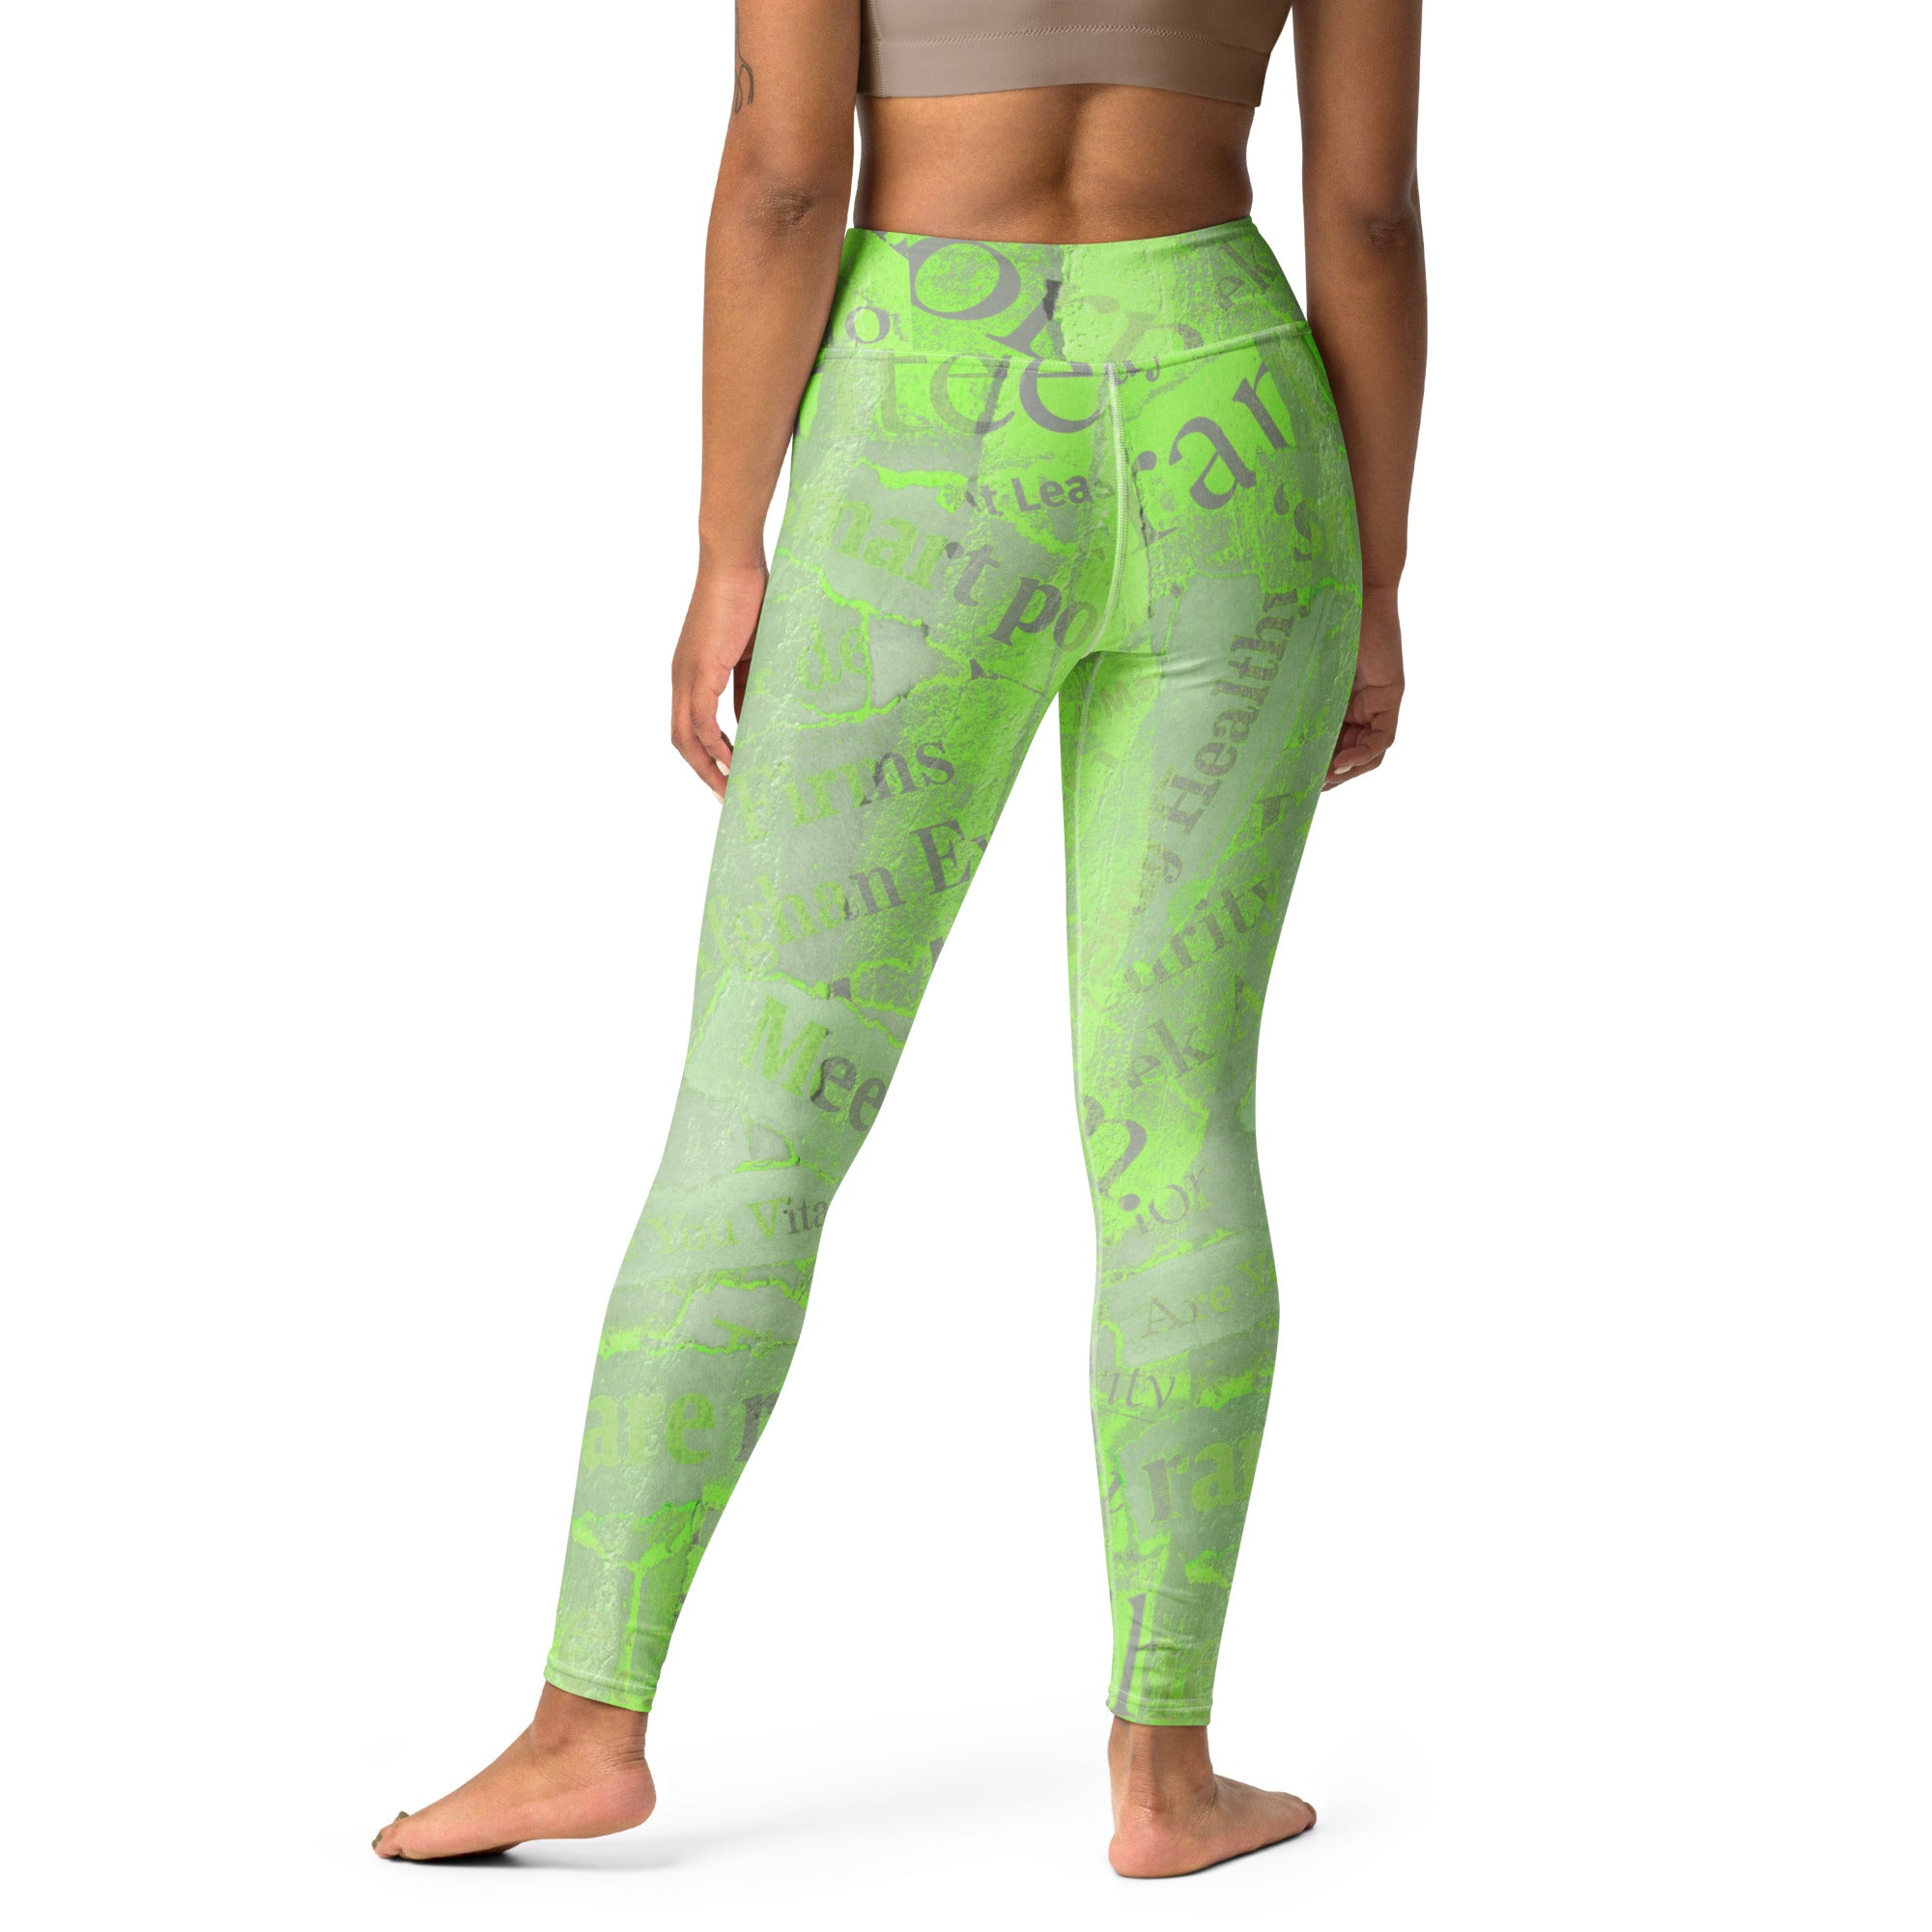 Newspaper Nouveau Yoga Leggings with eco-friendly yoga mat, ready for a session.